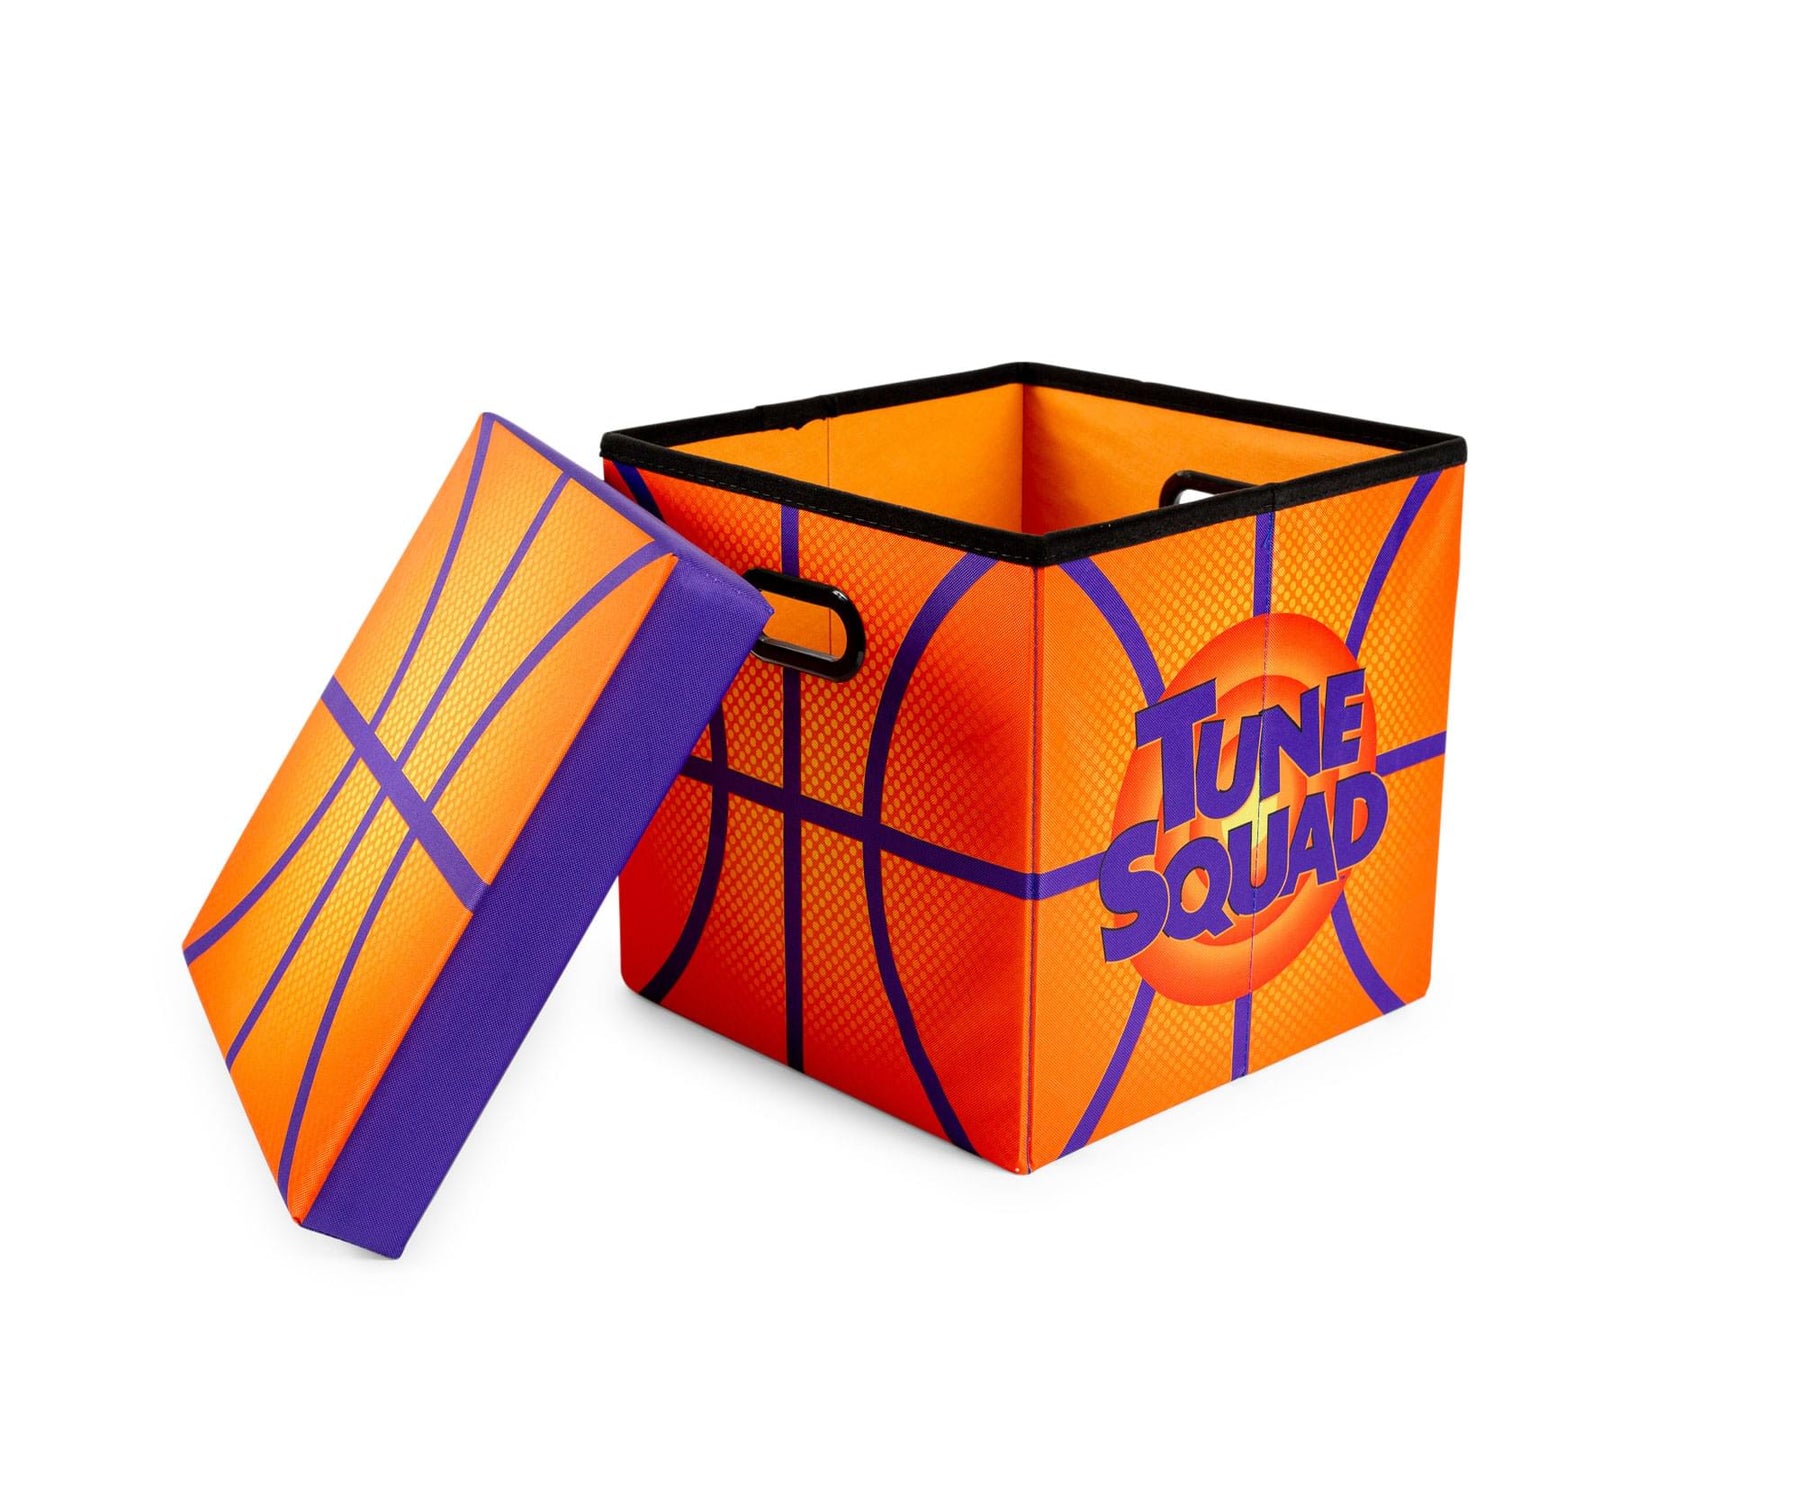 Space Jam: A New Legacy Orange Storage Bin Cube Organizer with Lid | 15 Inches